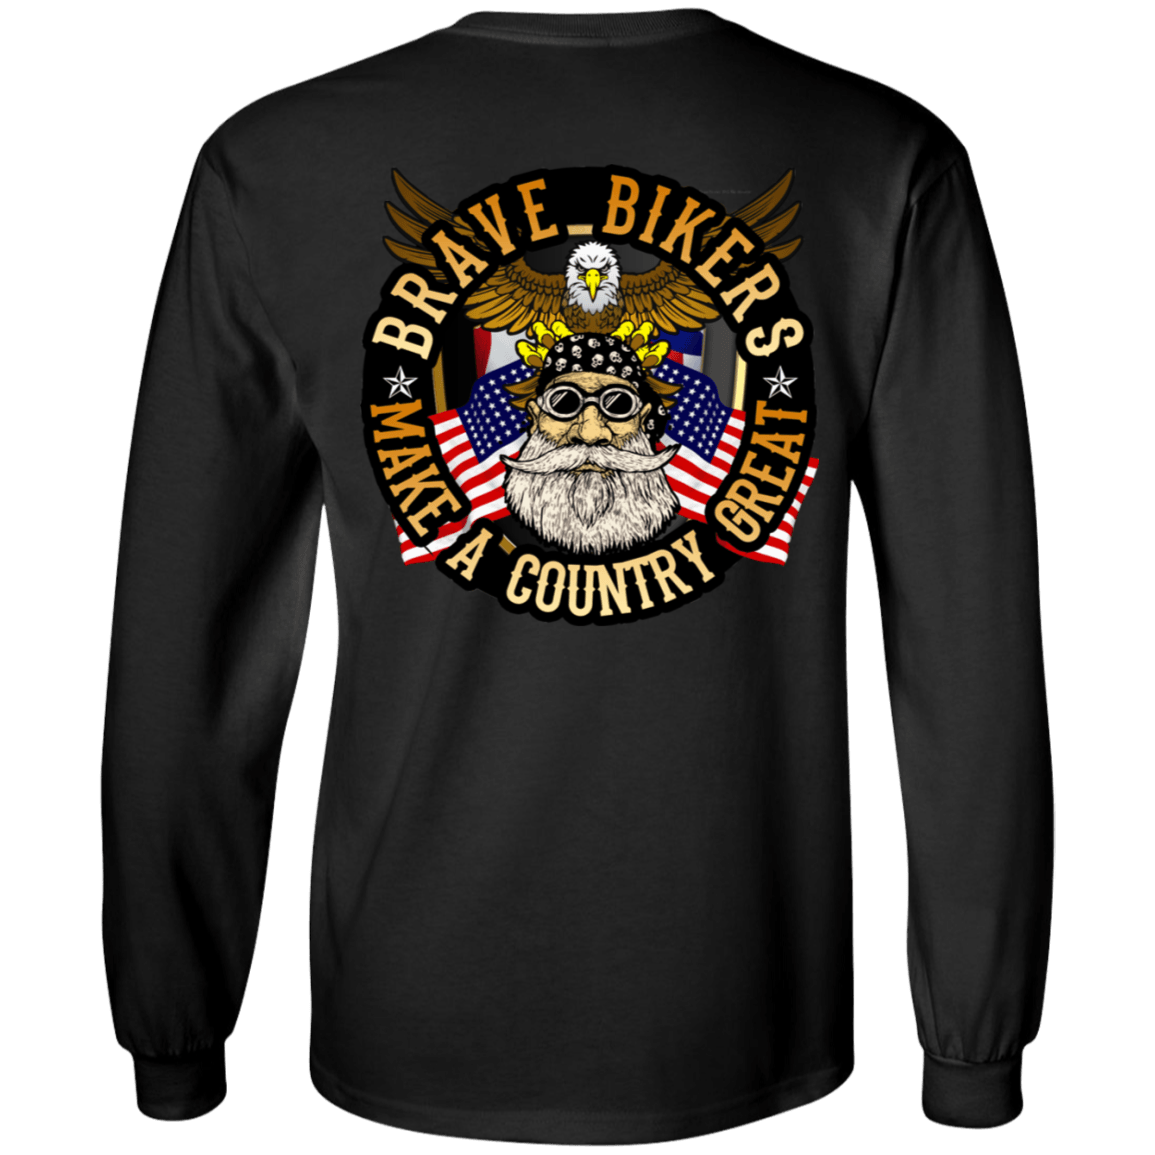 Bikers Make A Country Great Long Sleeves - American Legend Rider